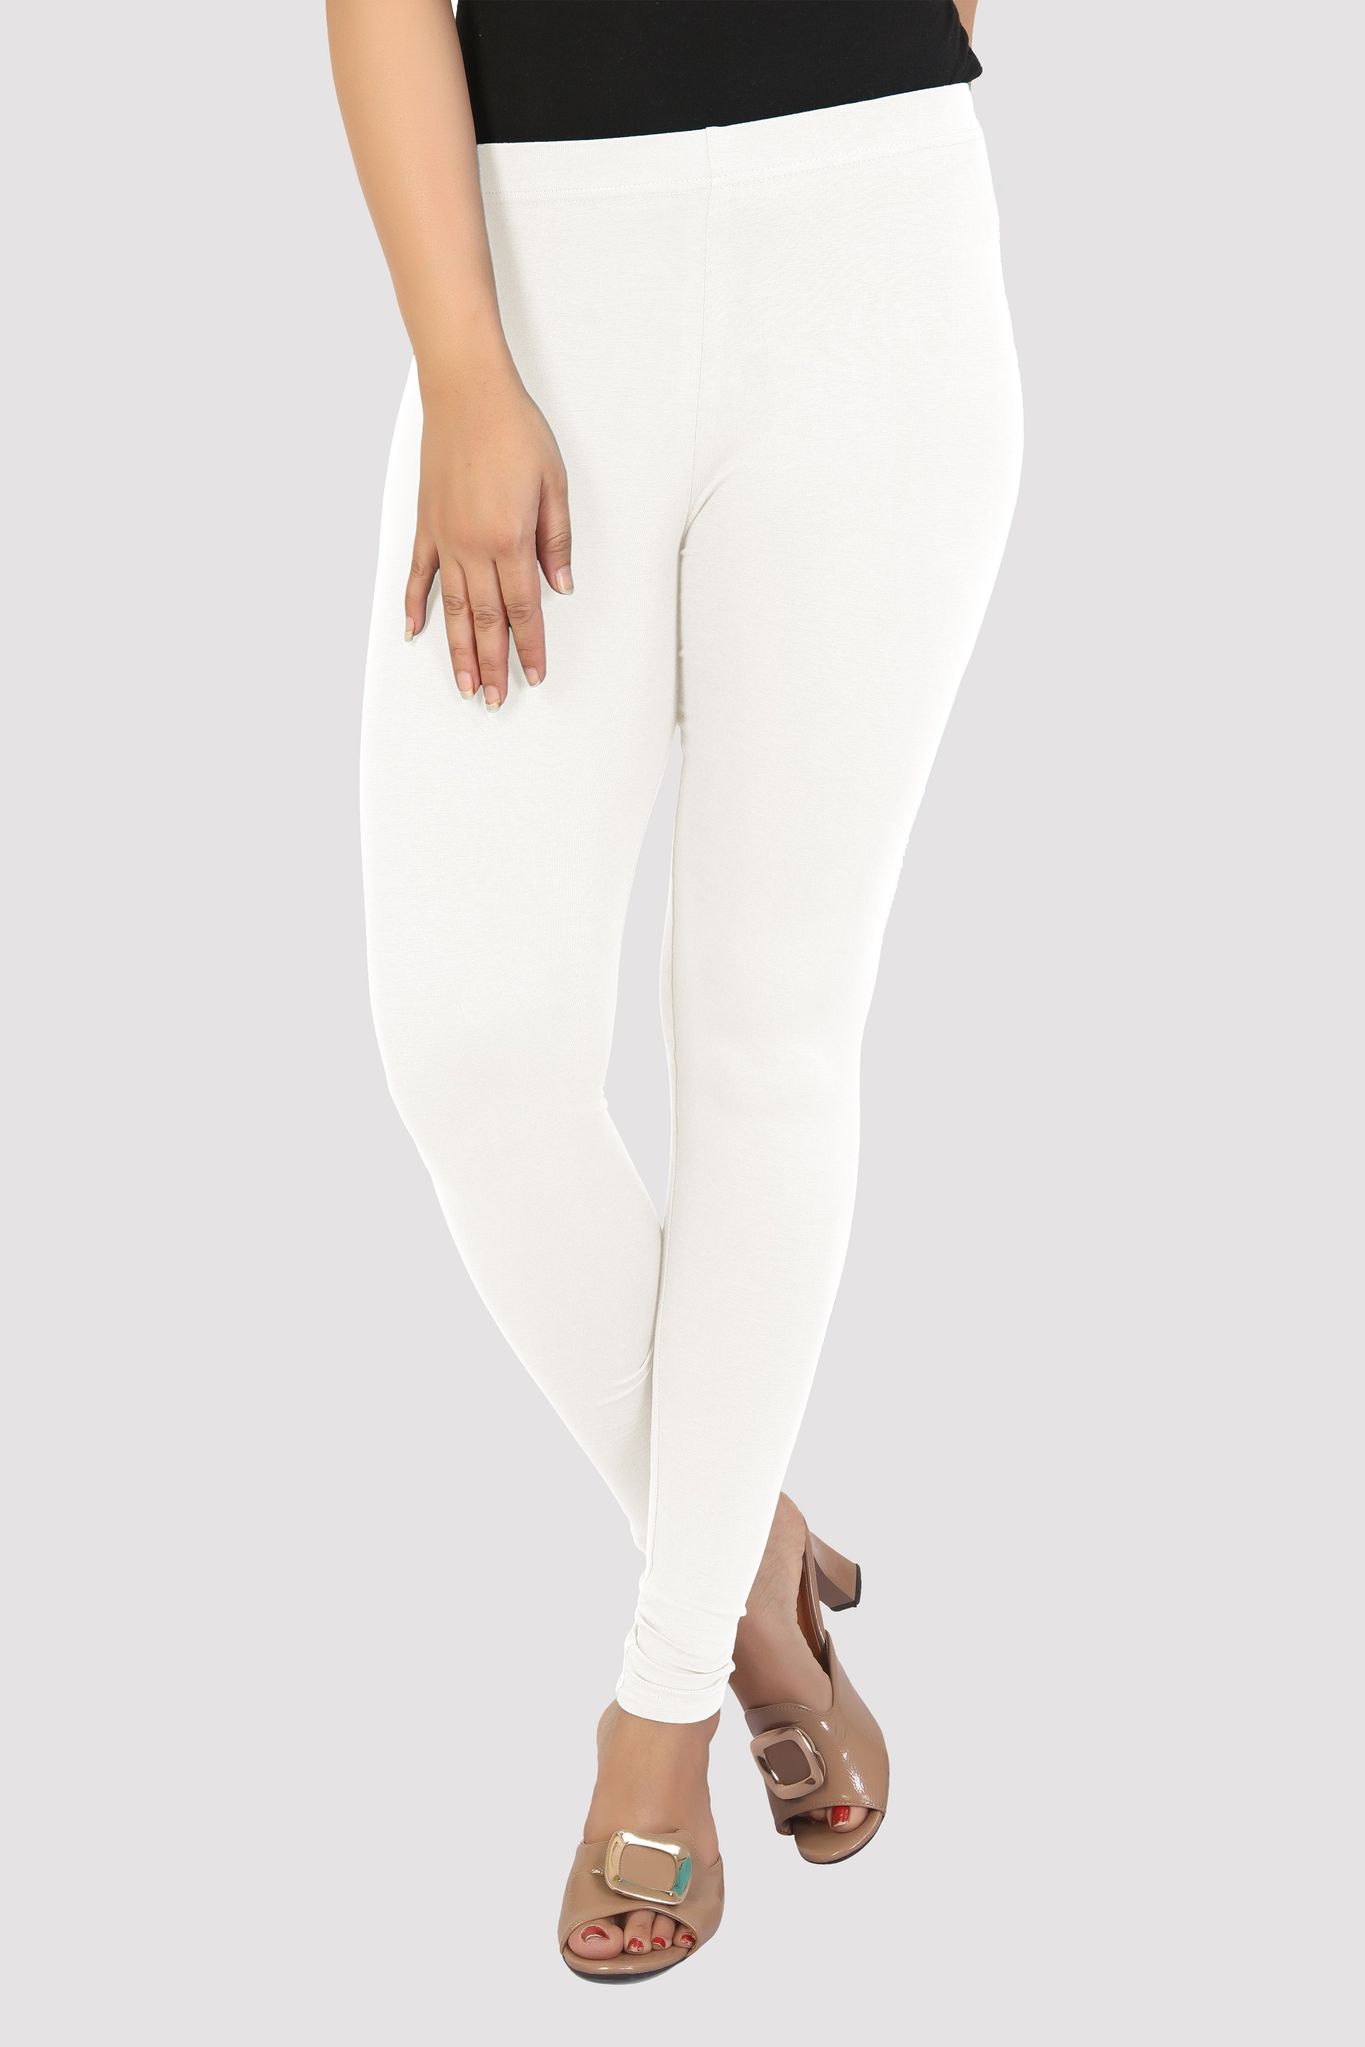 Cotton Lycra Ankle Length Legging at Rs 137.5/piece | Surat | ID:  22735368873-cheohanoi.vn